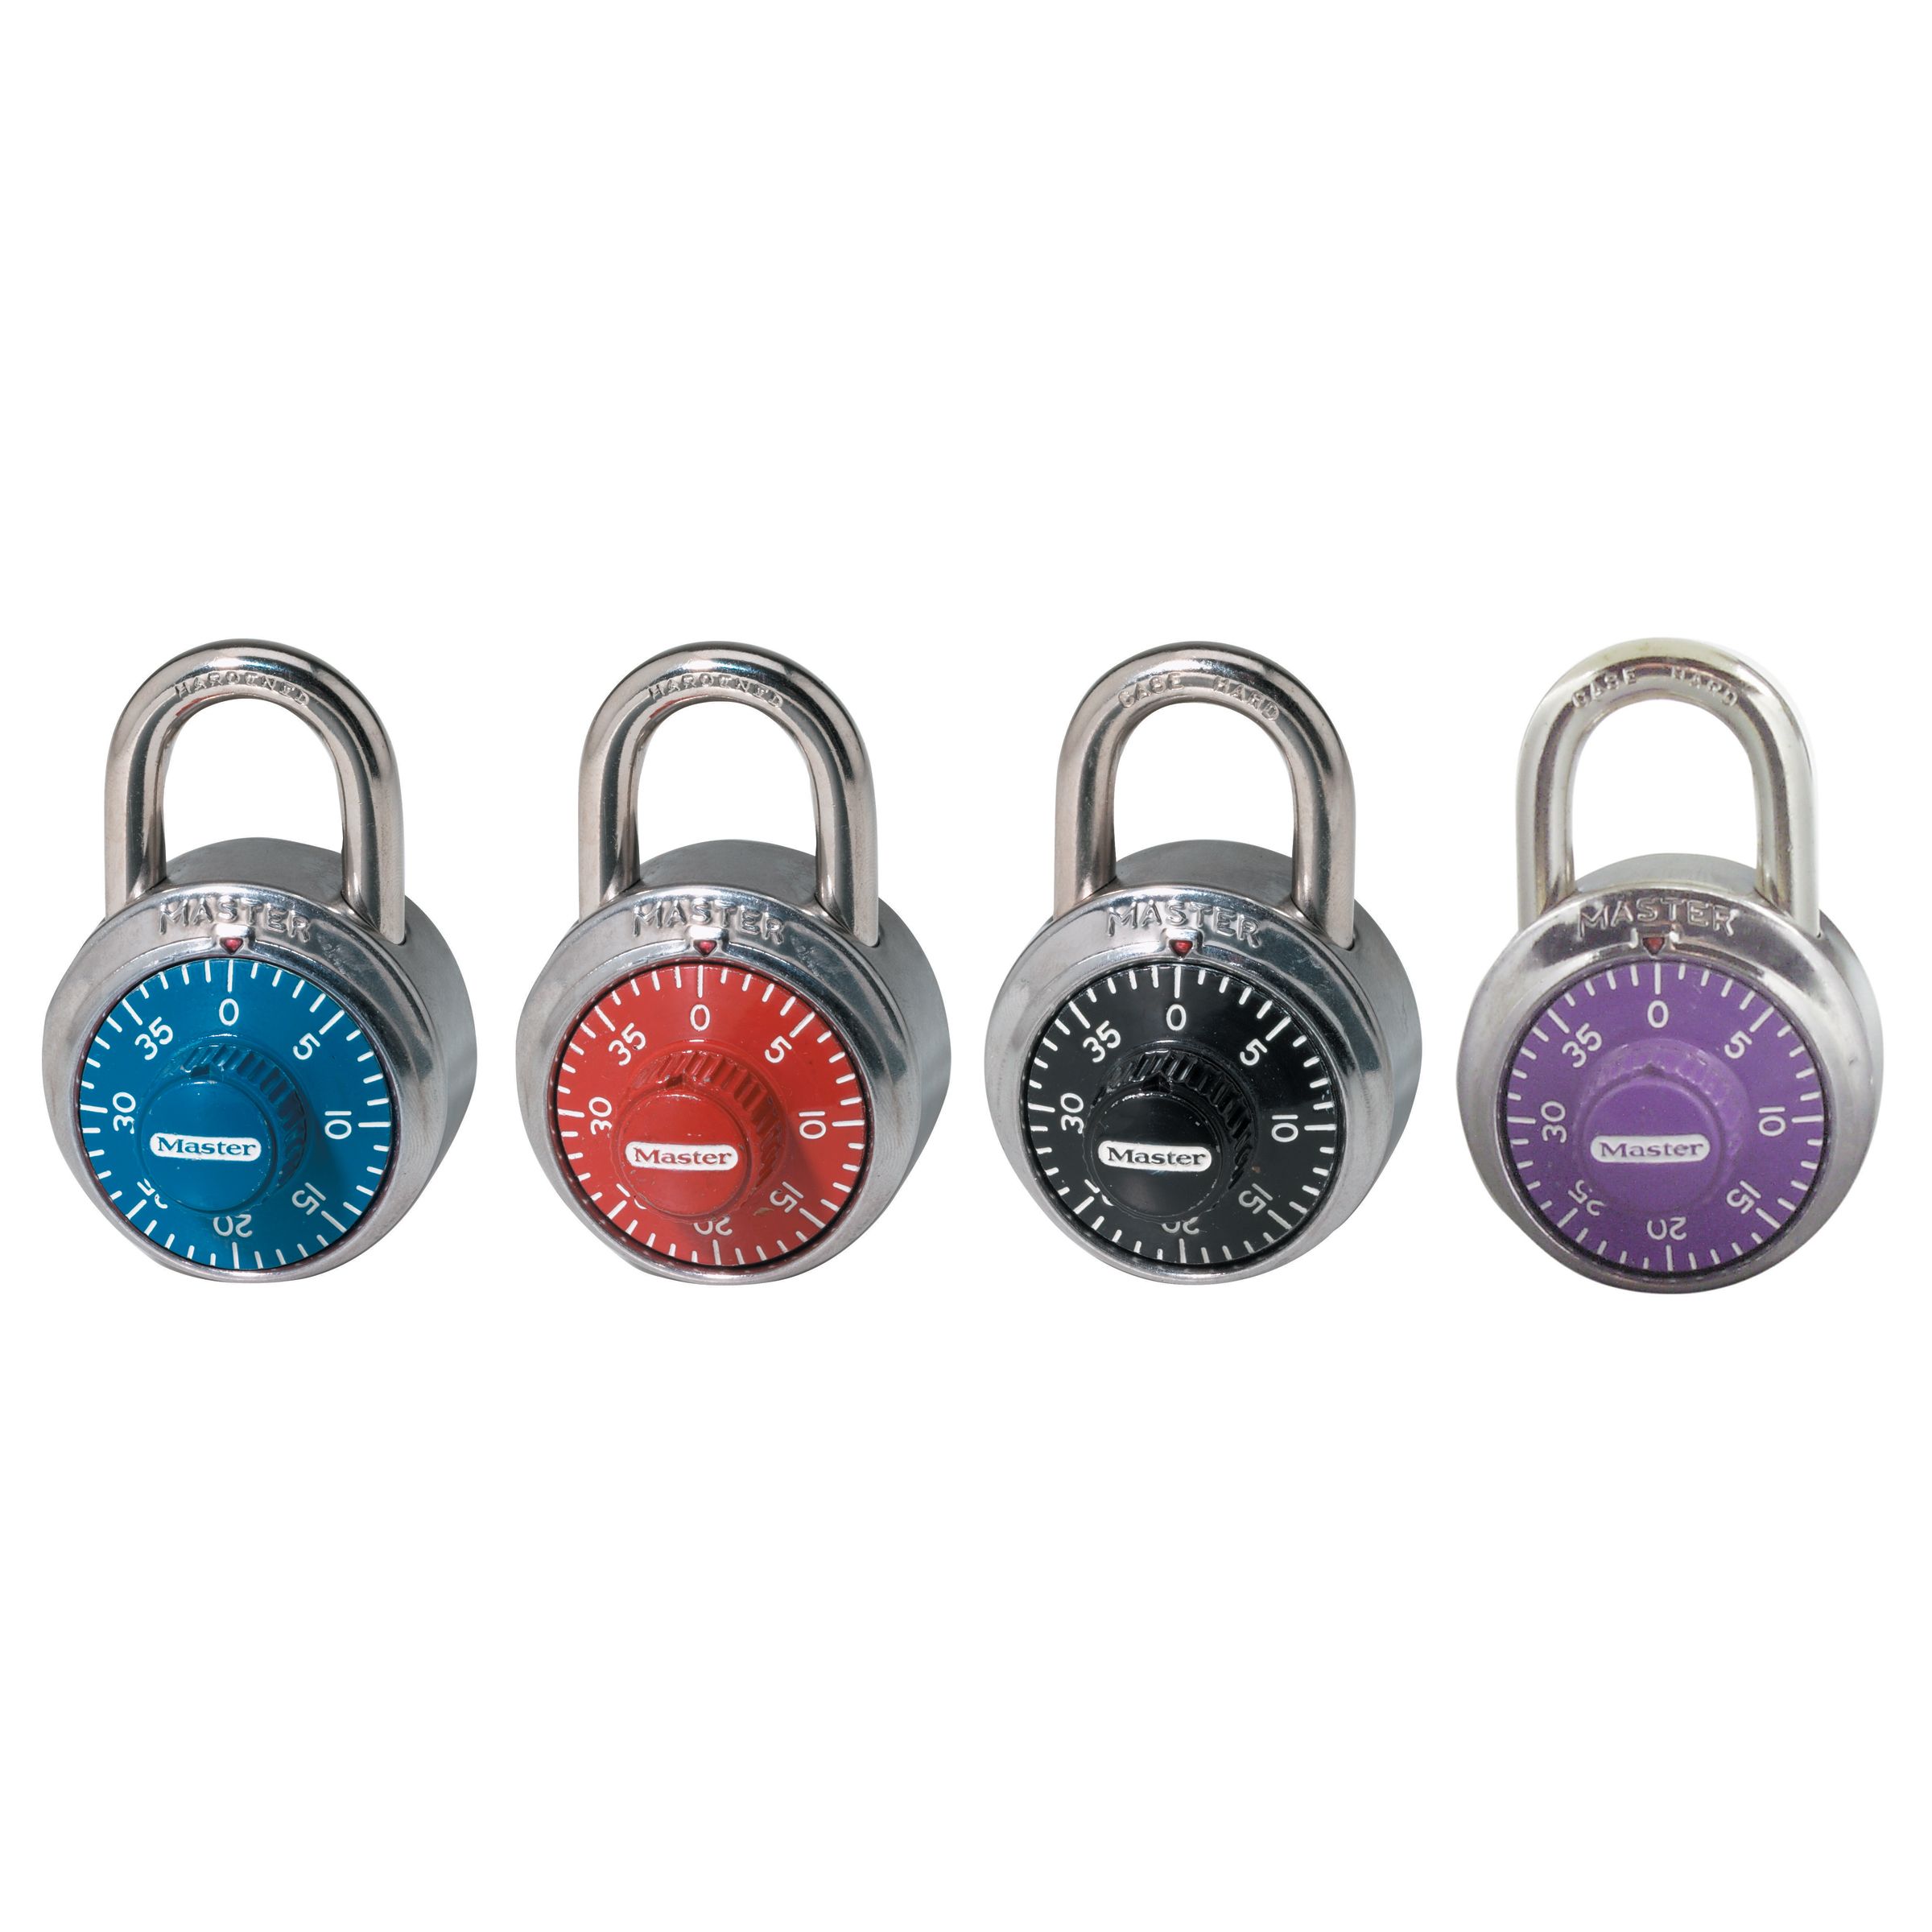 Master Lock 1-7/8 in. Combination Lock with Assorted Color Dials